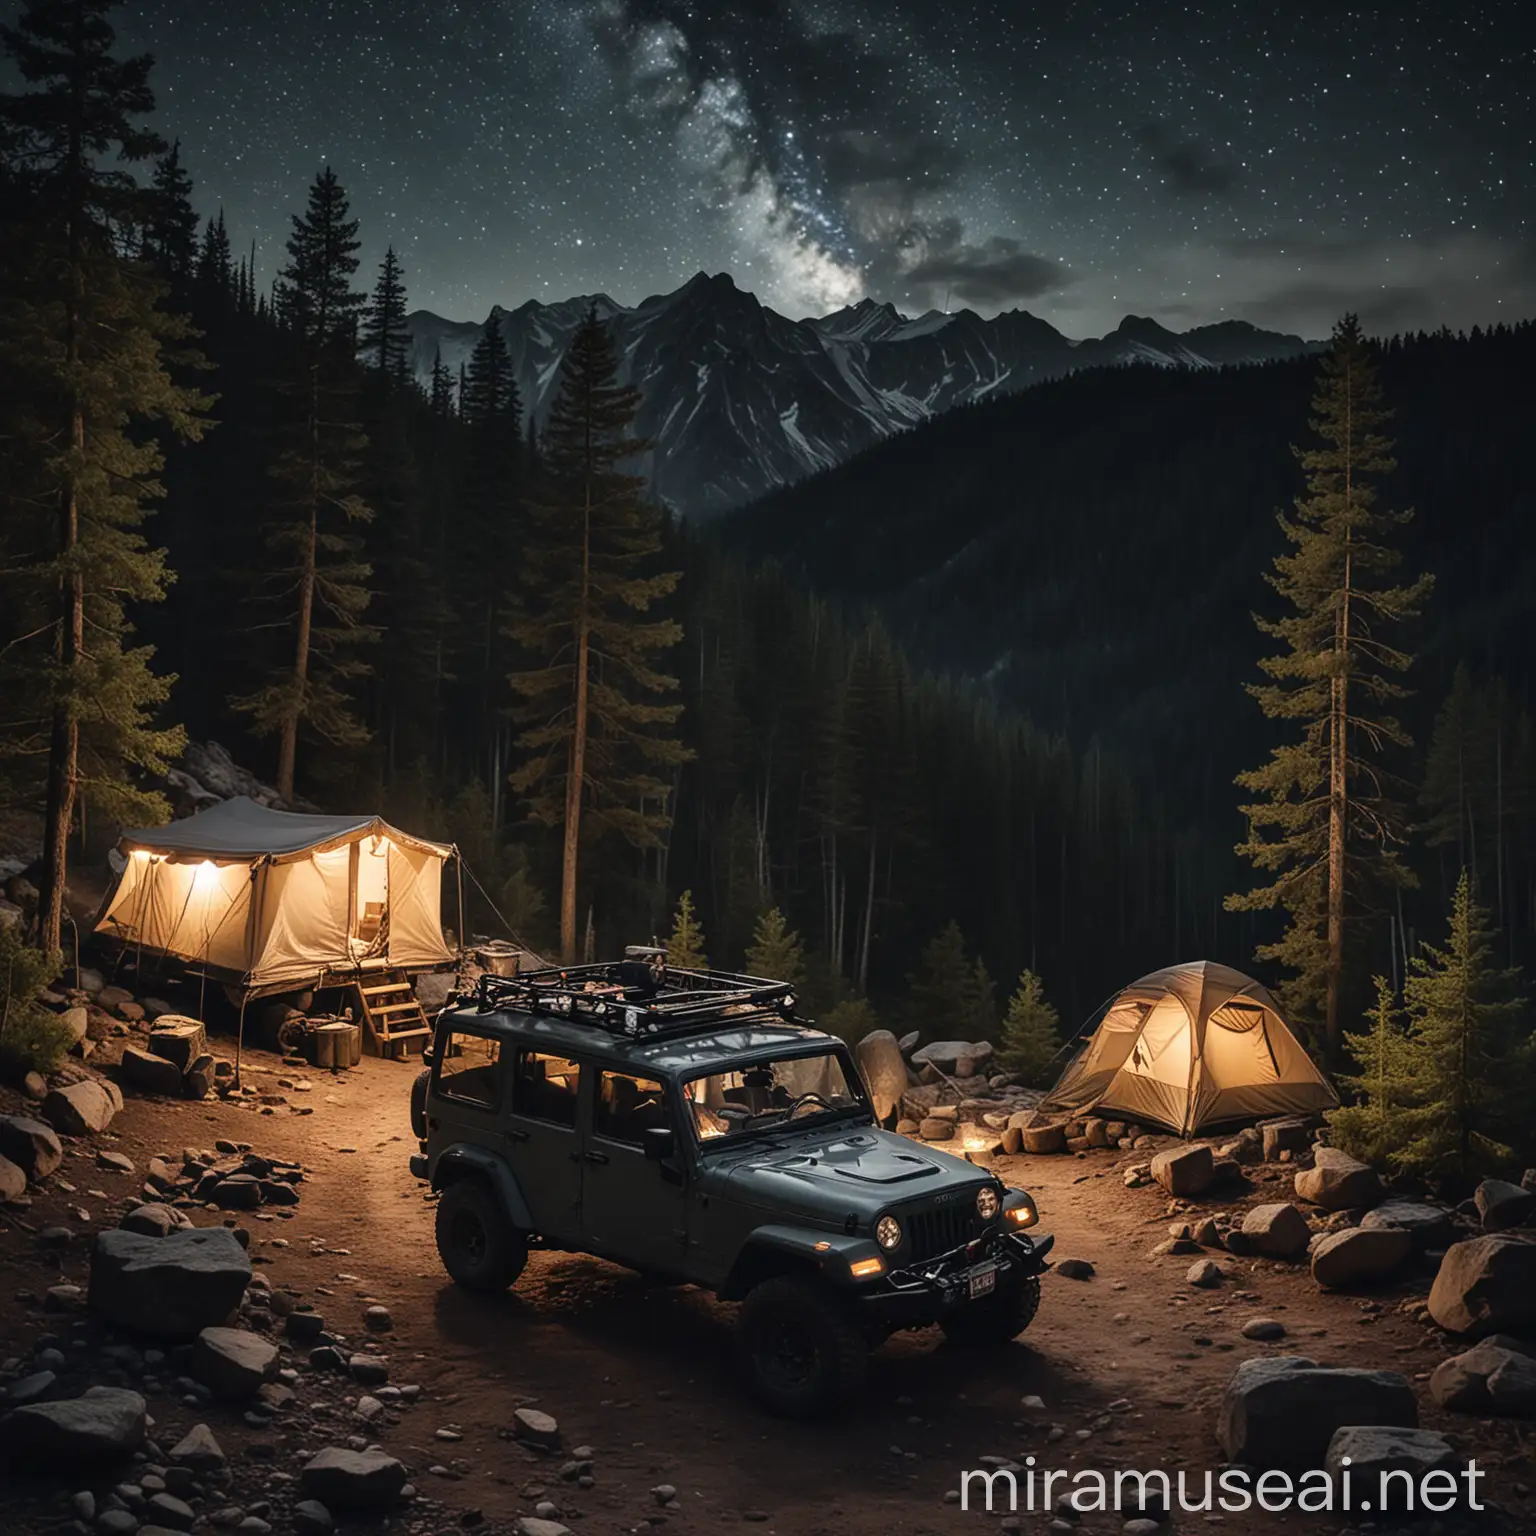 CREATE A NIGTH SCENE WITH A JEEP CAMP INTO THE MOUNTAIN, TREES.
